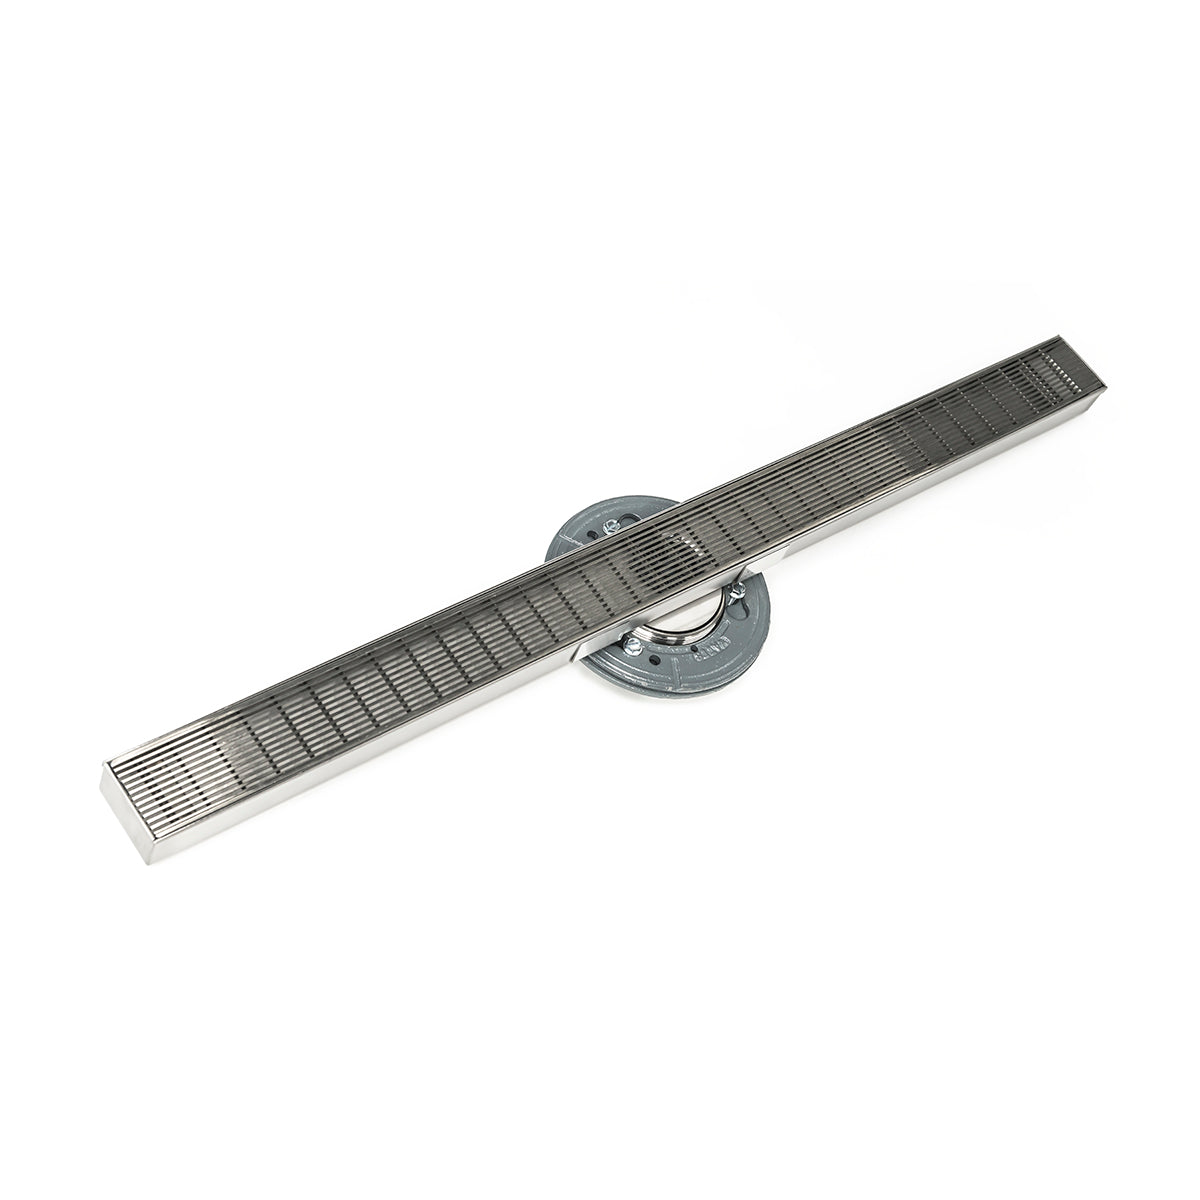 Infinity Drain 36" S-Stainless Steel Series High Flow Site Sizable Linear Drain Kit with 2 1/2" Wedge Wire Grate with ABS Drain Body, 3" Outlet